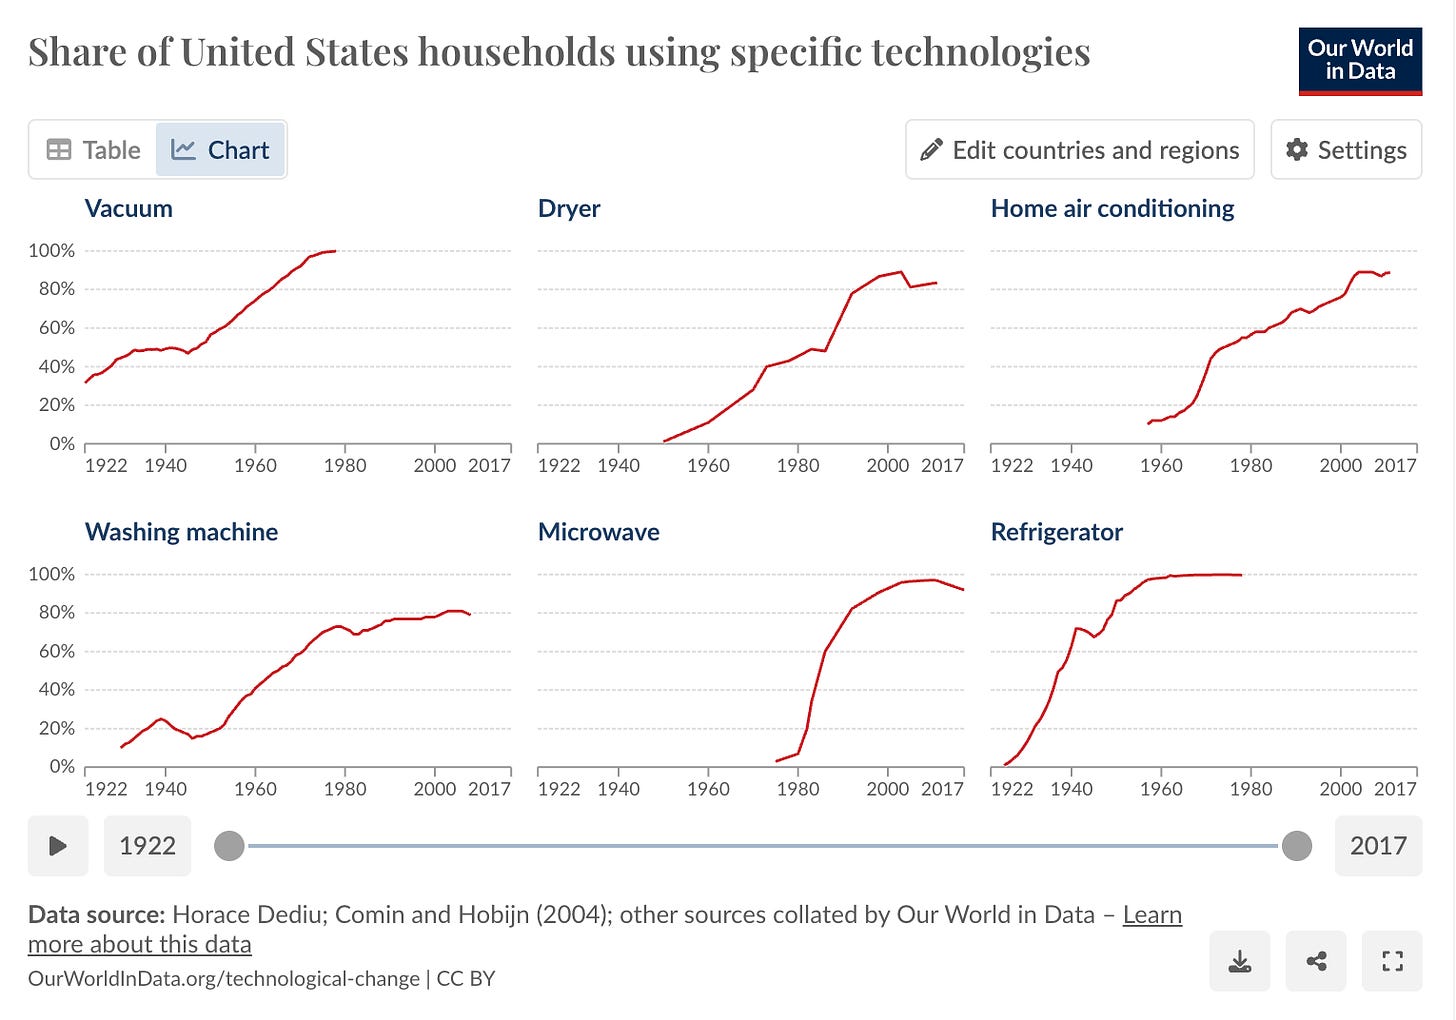 “Share of US households using specific technologies.” A set of six graphs demonstrating the adoption of the vacuum (steady increase since 1922 with a plateau in the 1930s and 1940s), dryer (steady increase since 1960 with a couple of dips in 1980 and 2000), home air conditioning (steady growth since 1960, especially rapid in the 1970s), washing machine (growth wince 1930 with a dip in the 1940s), microwave (huge steep increase since 1980, but dipping slightly in the 2010s), and fridge (steep growth since 1922 save for a dip in the 1940s). 